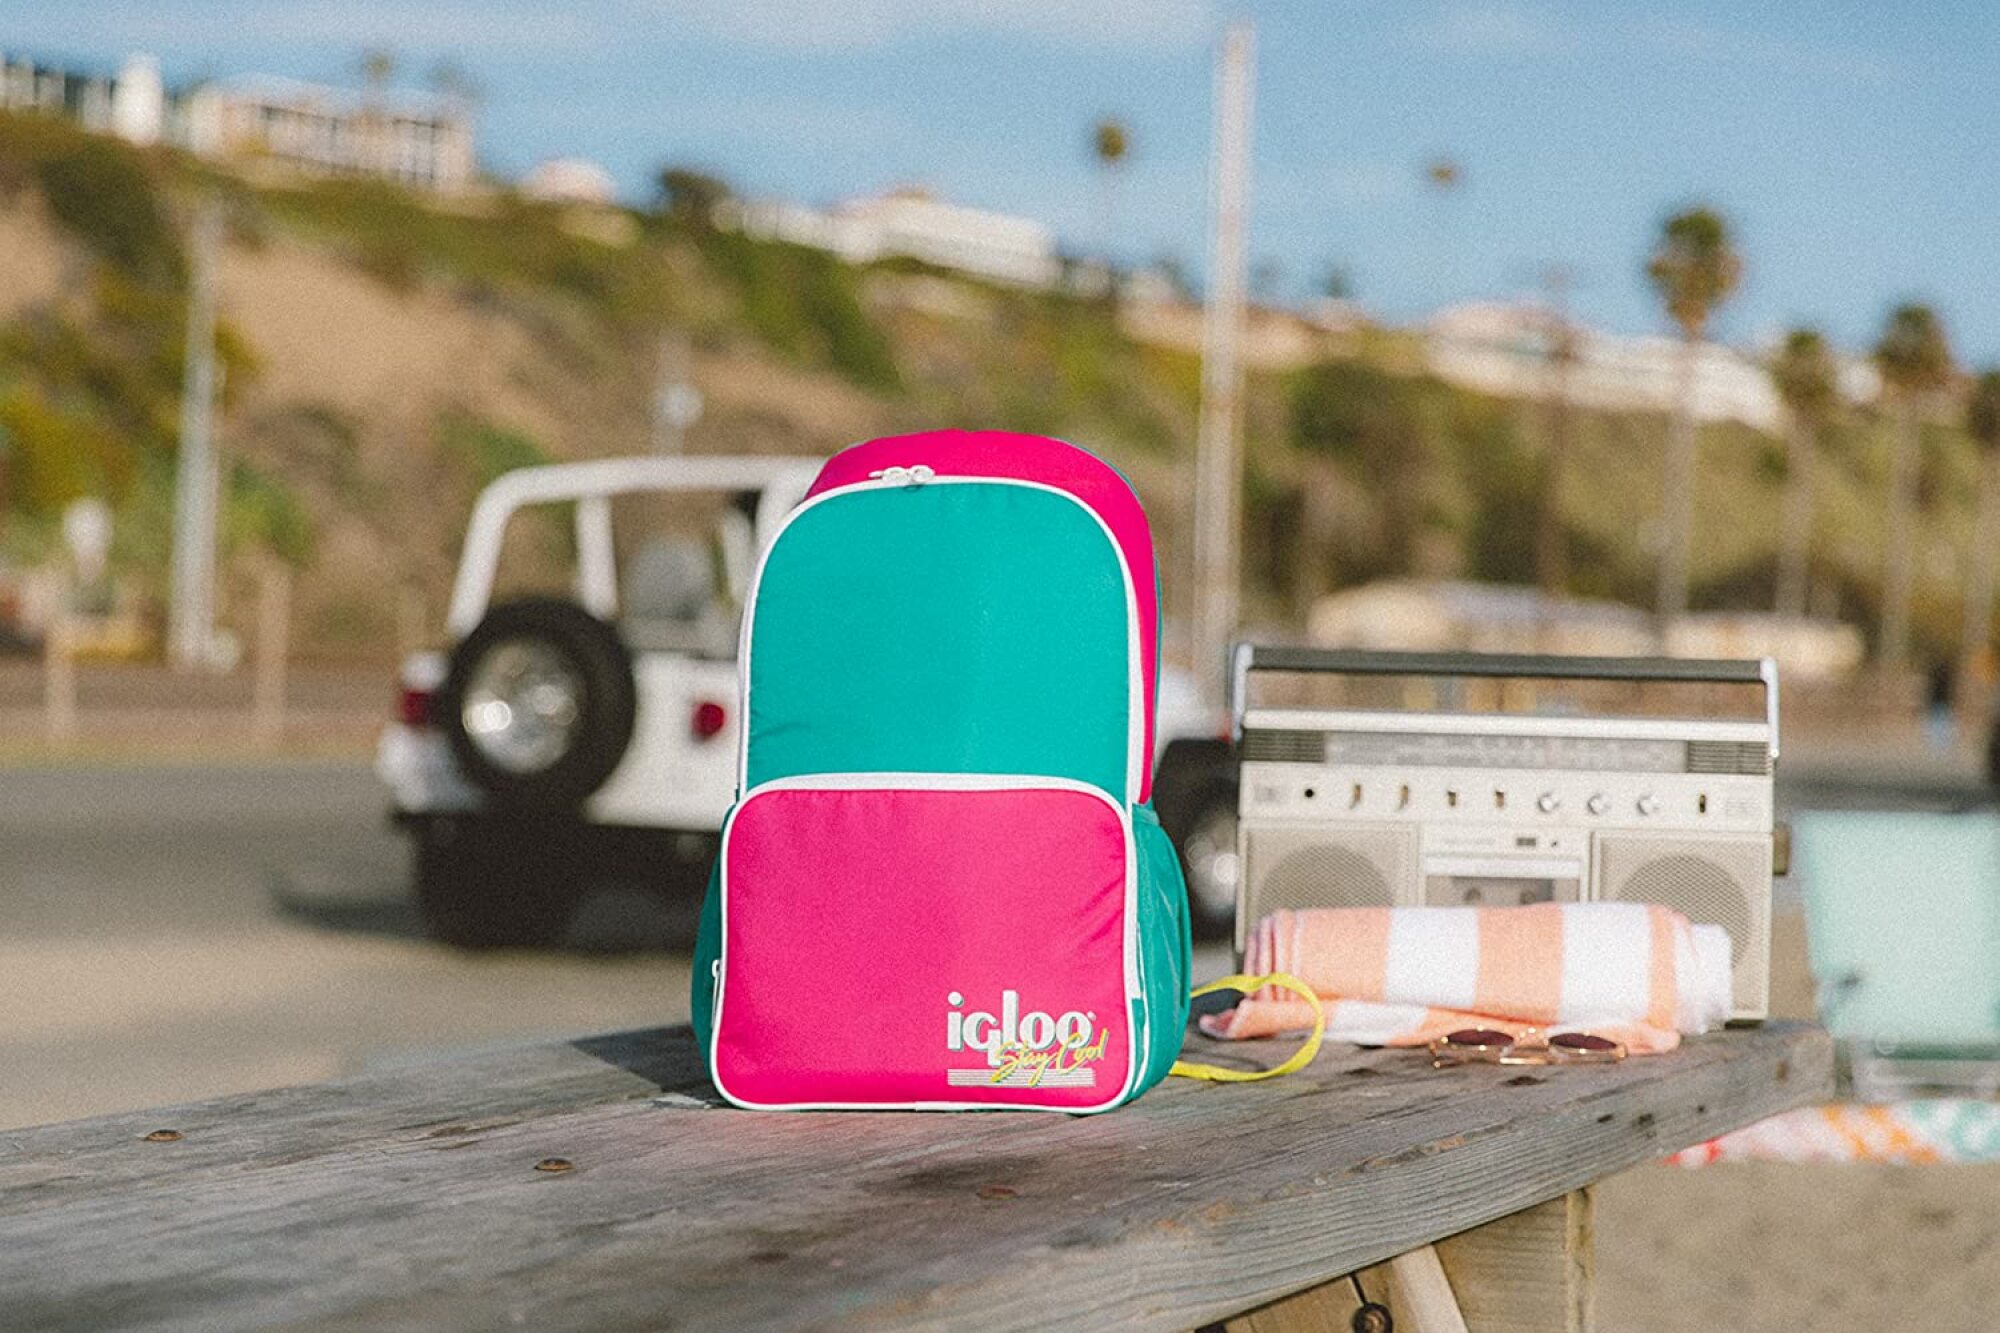 Igloo Retro Backpack on a bench.